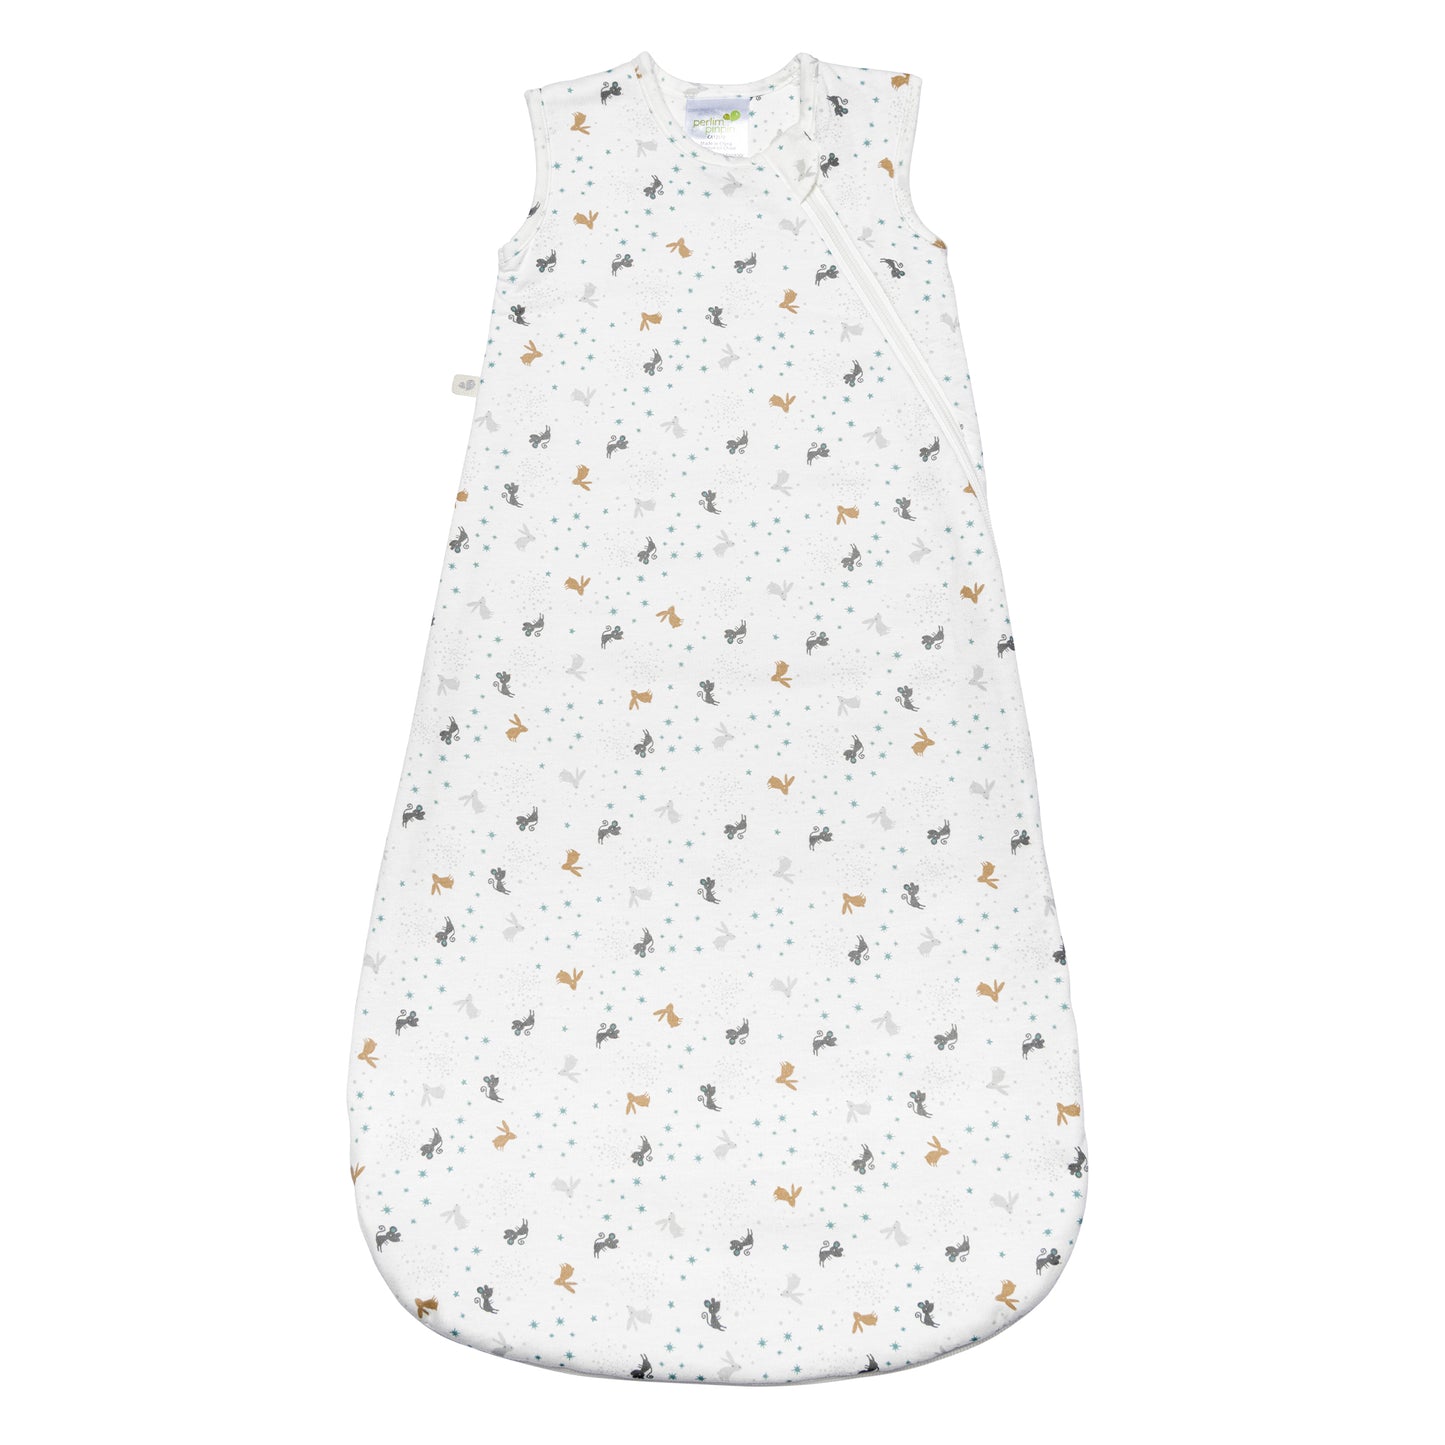 Quilted bamboo sleep sack - Mice (2.5 togs)